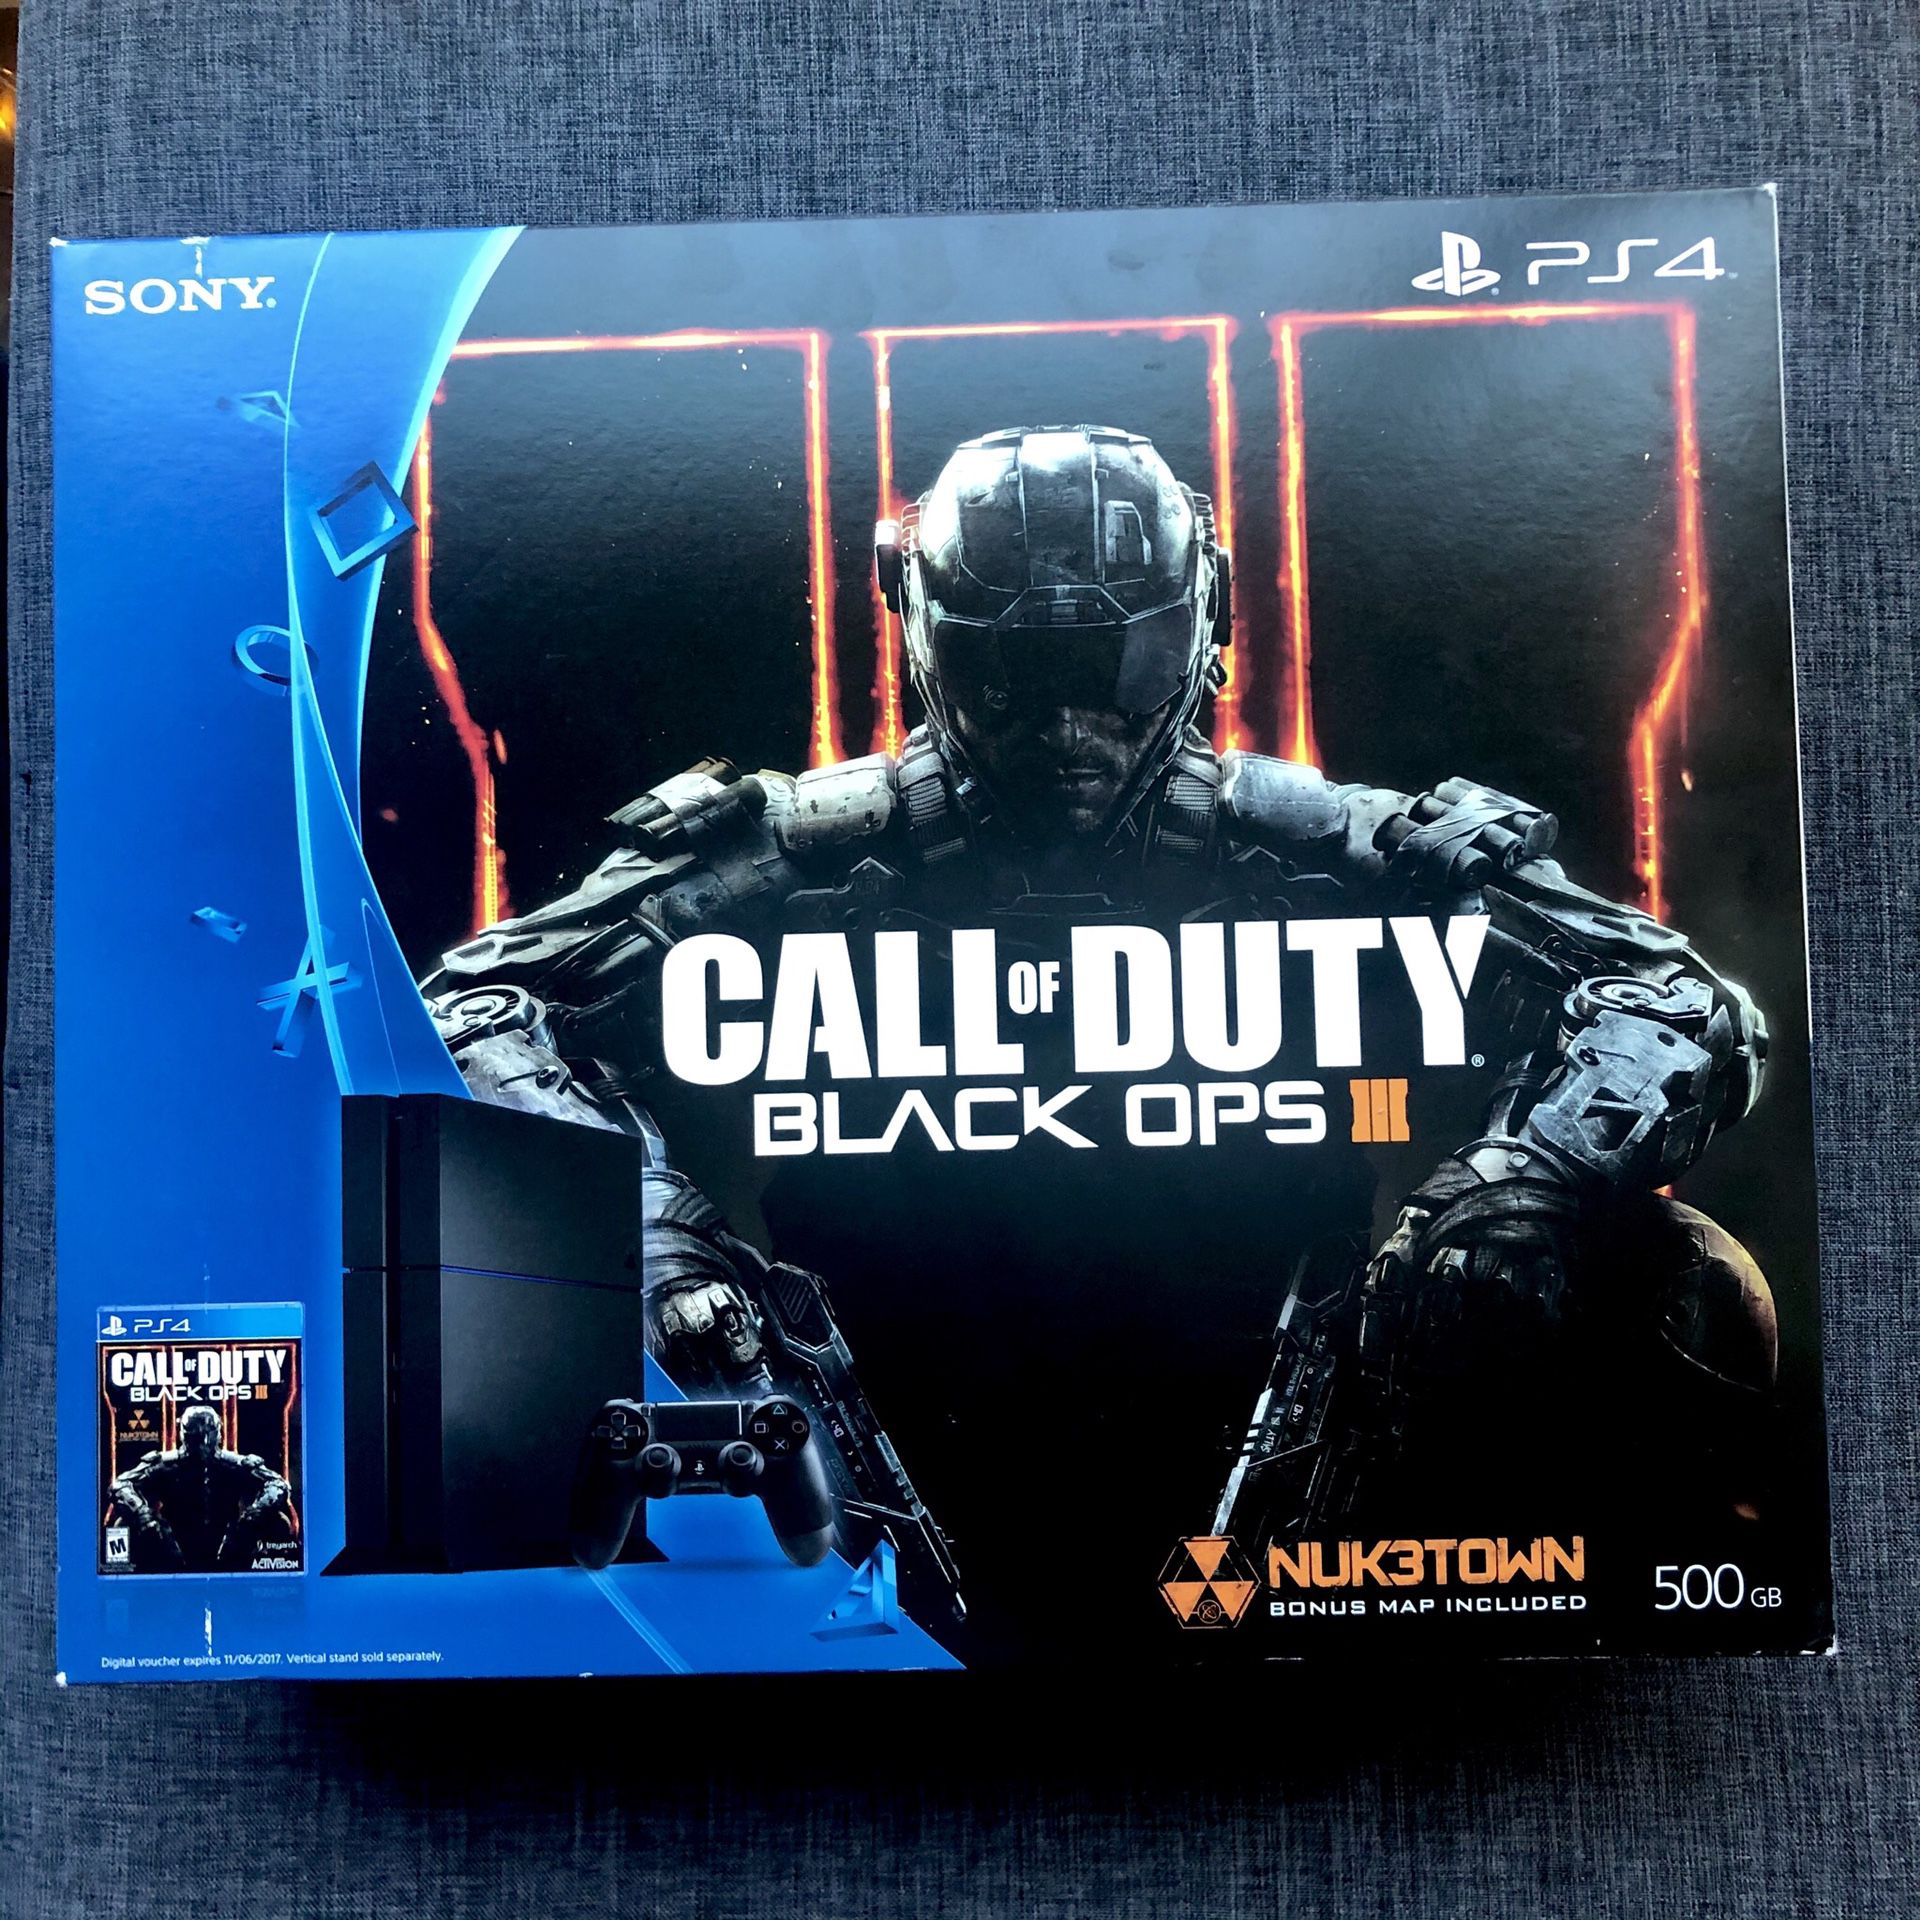 SEALED Sony Playstation 4 PS4 500GB Jet Black Console Call Of Duty Black OPS III